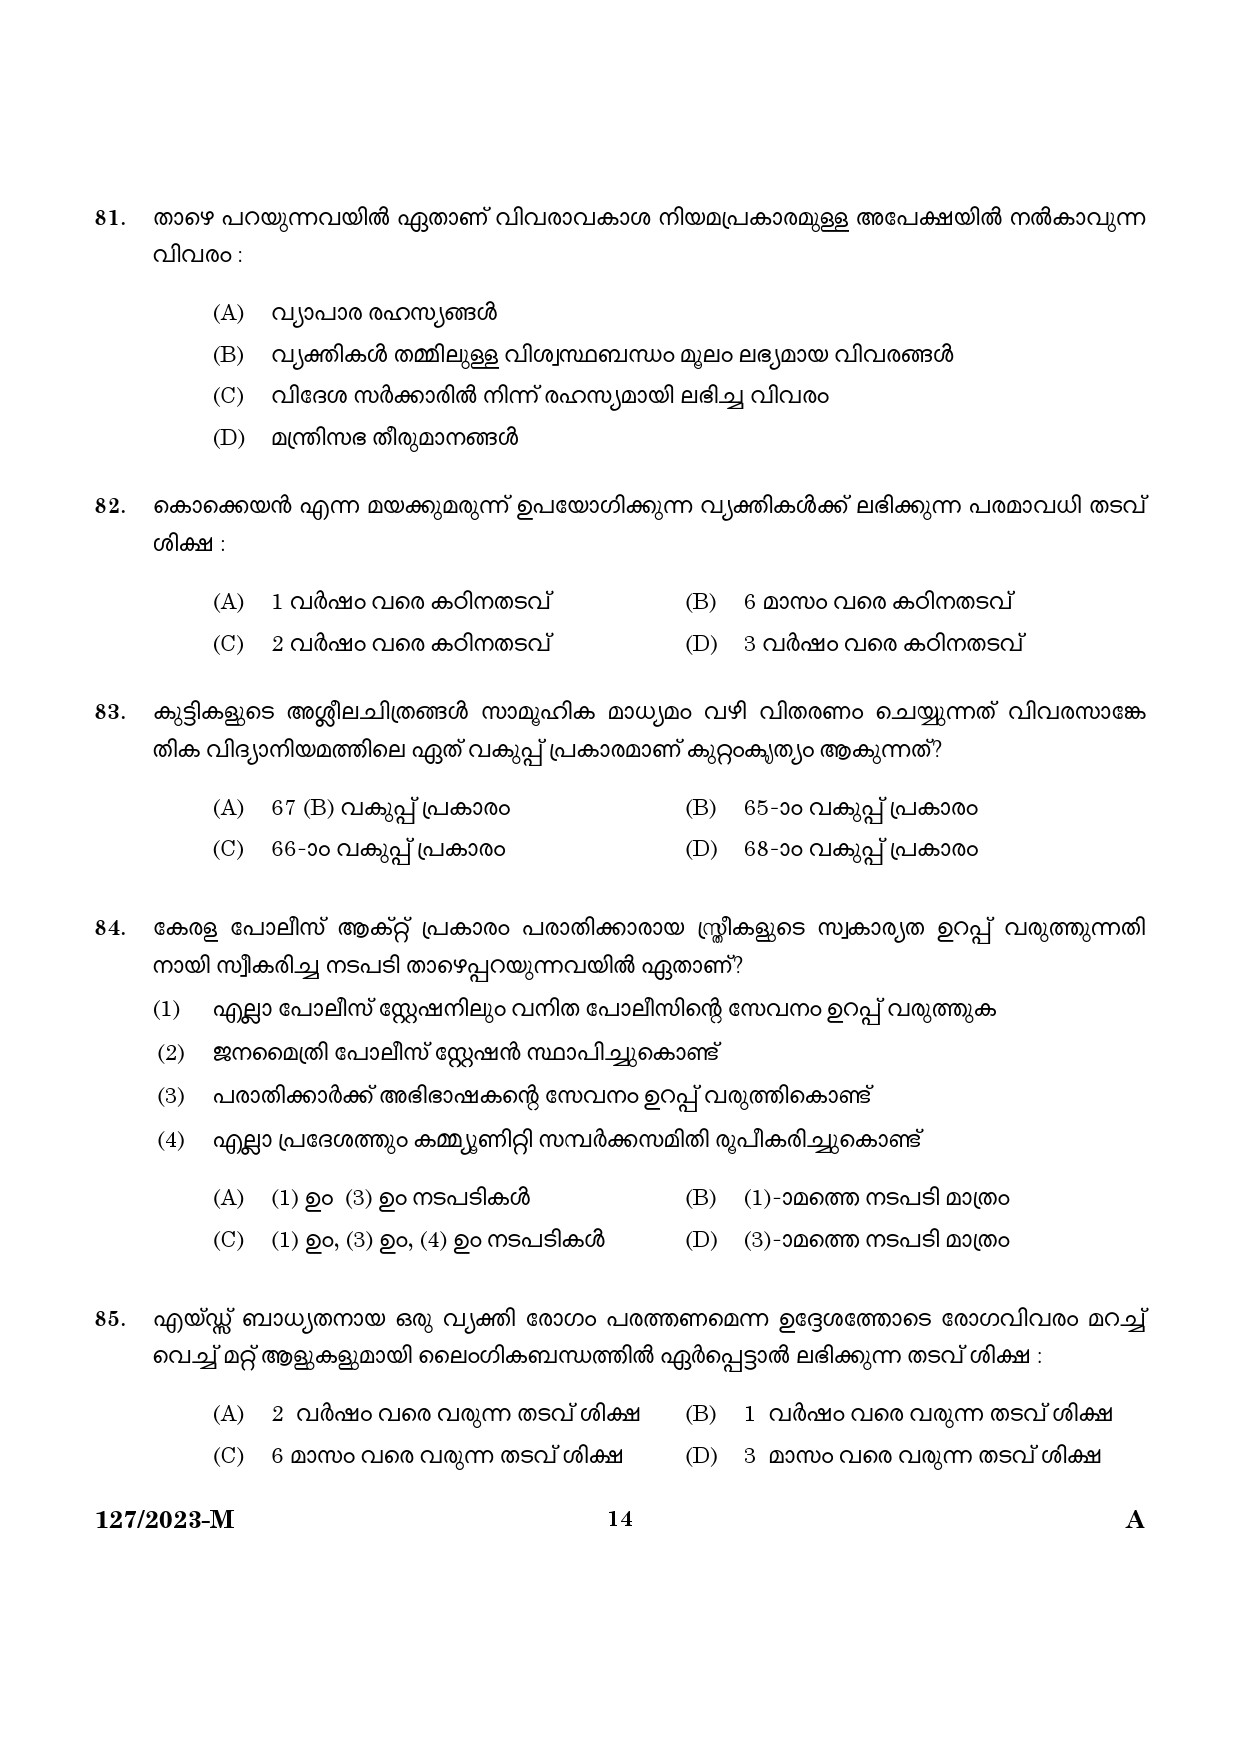 KPSC Police Constable Armed Police Battalion Malayalam Exam 2023 Code 1272023 M 12